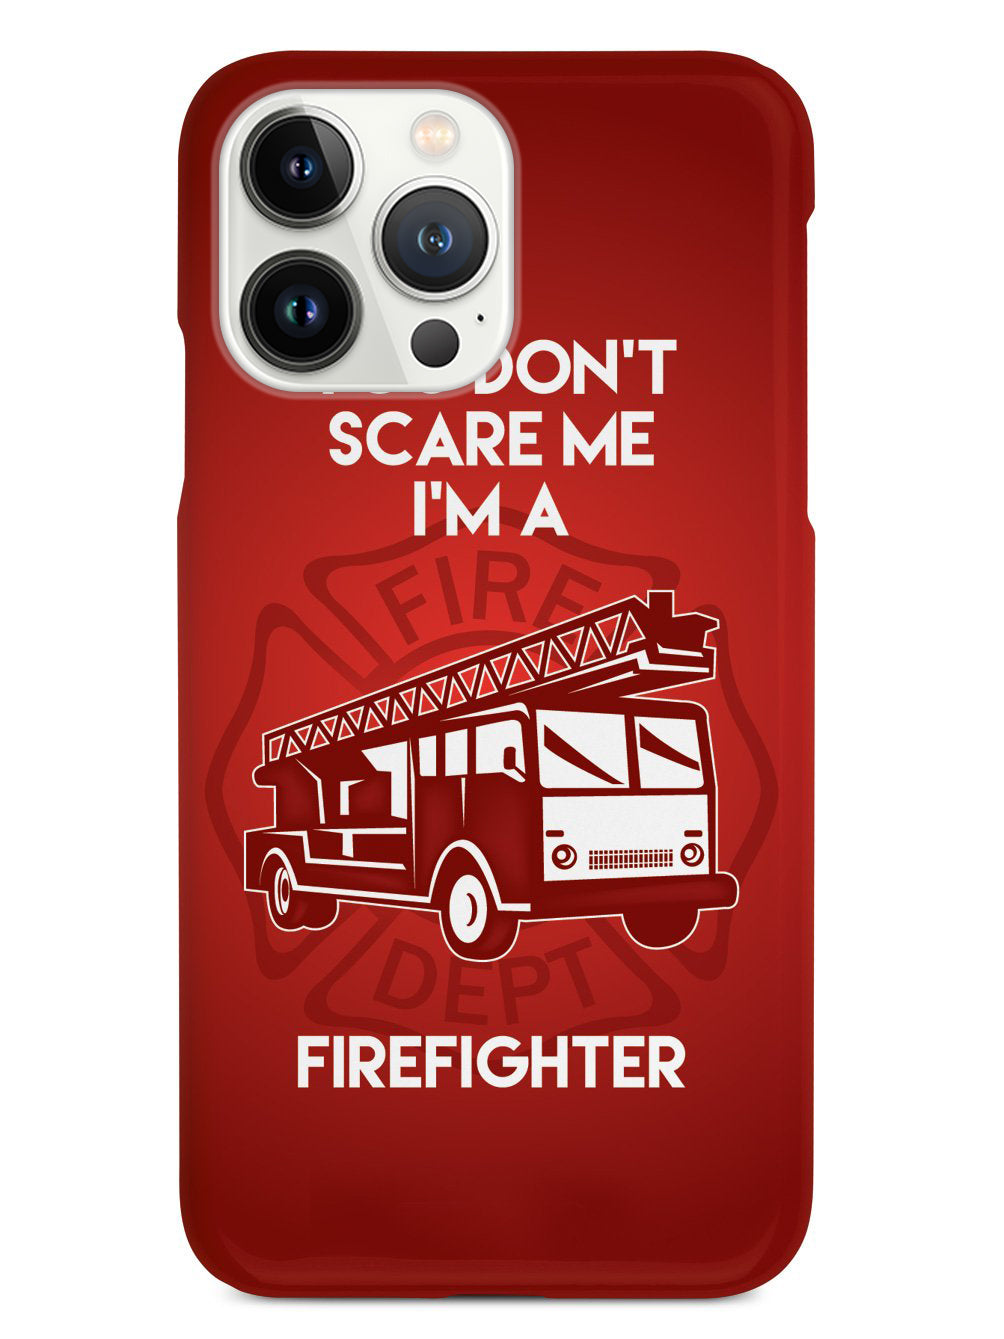 You Don't Scare Me, I'm a Firefighter Case